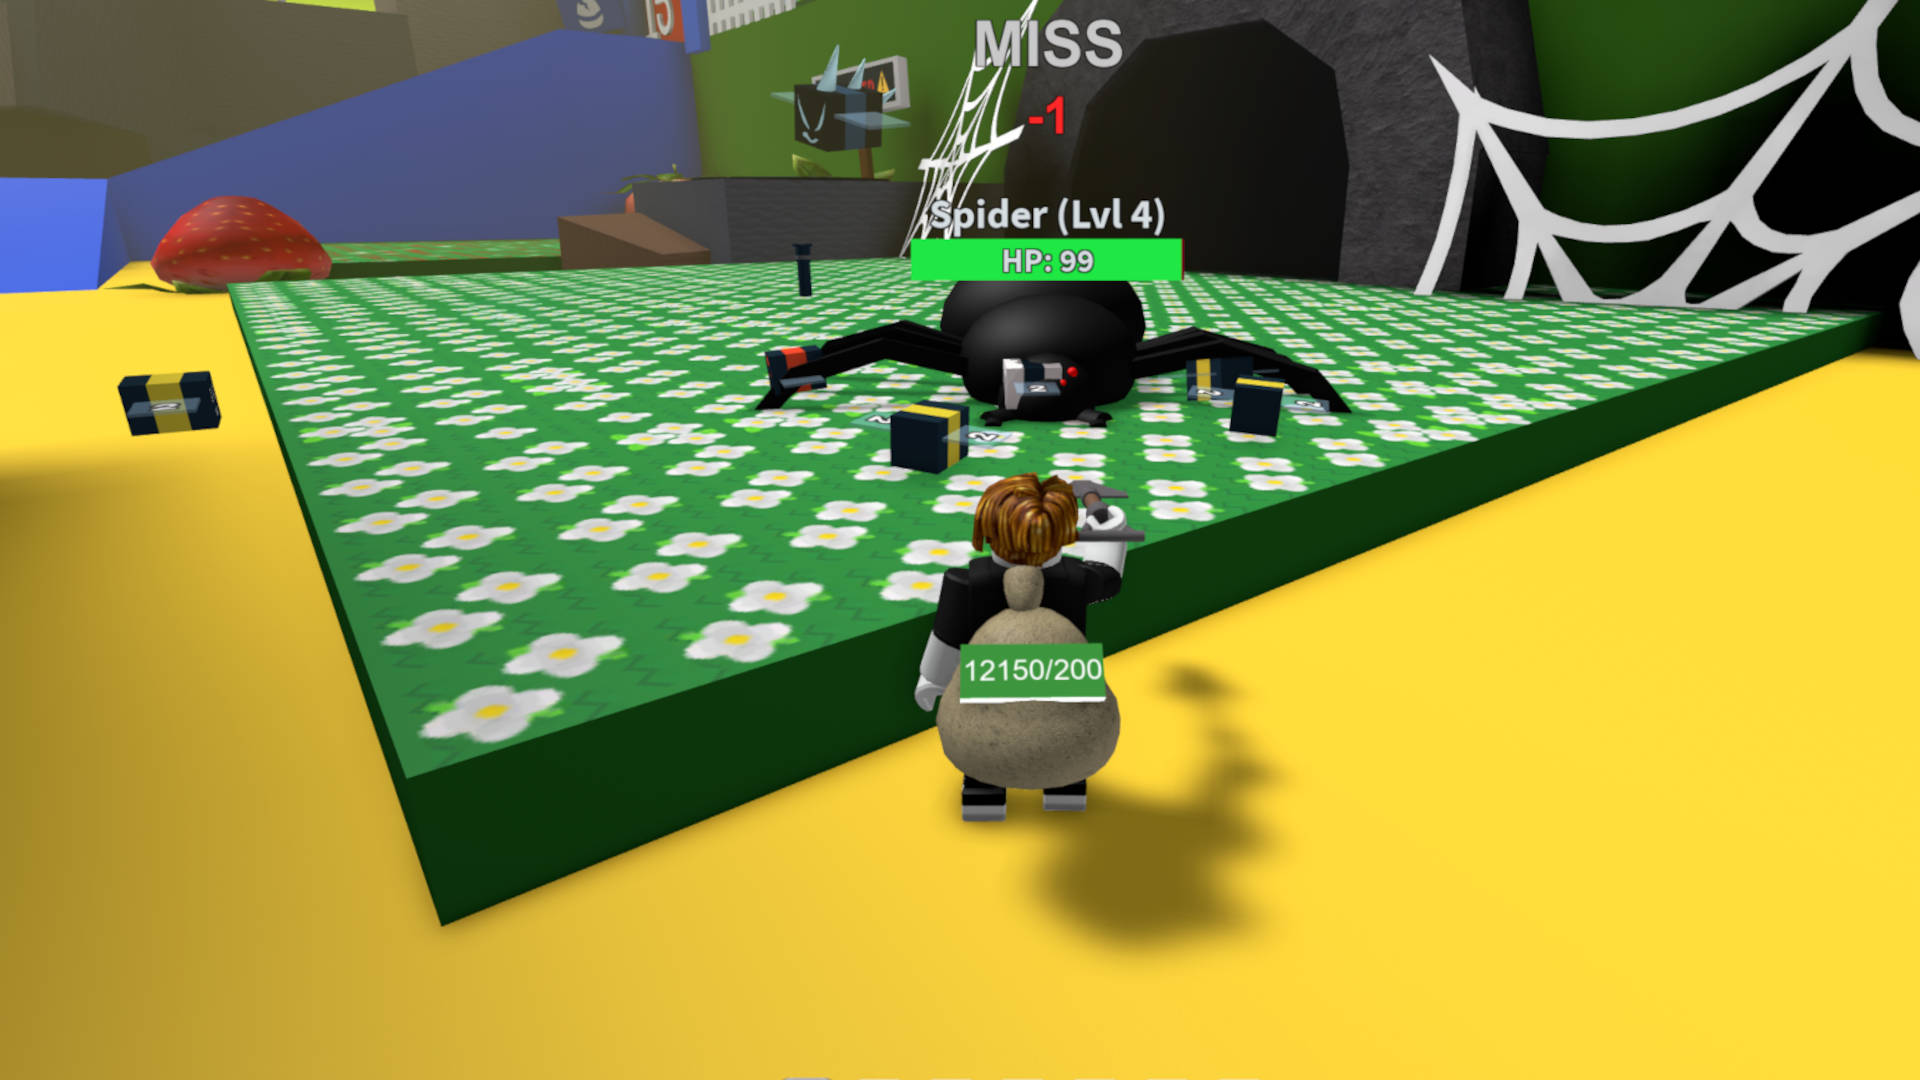 THE *BEST* NEW CODE on Roblox Bee Swarm Simulator 